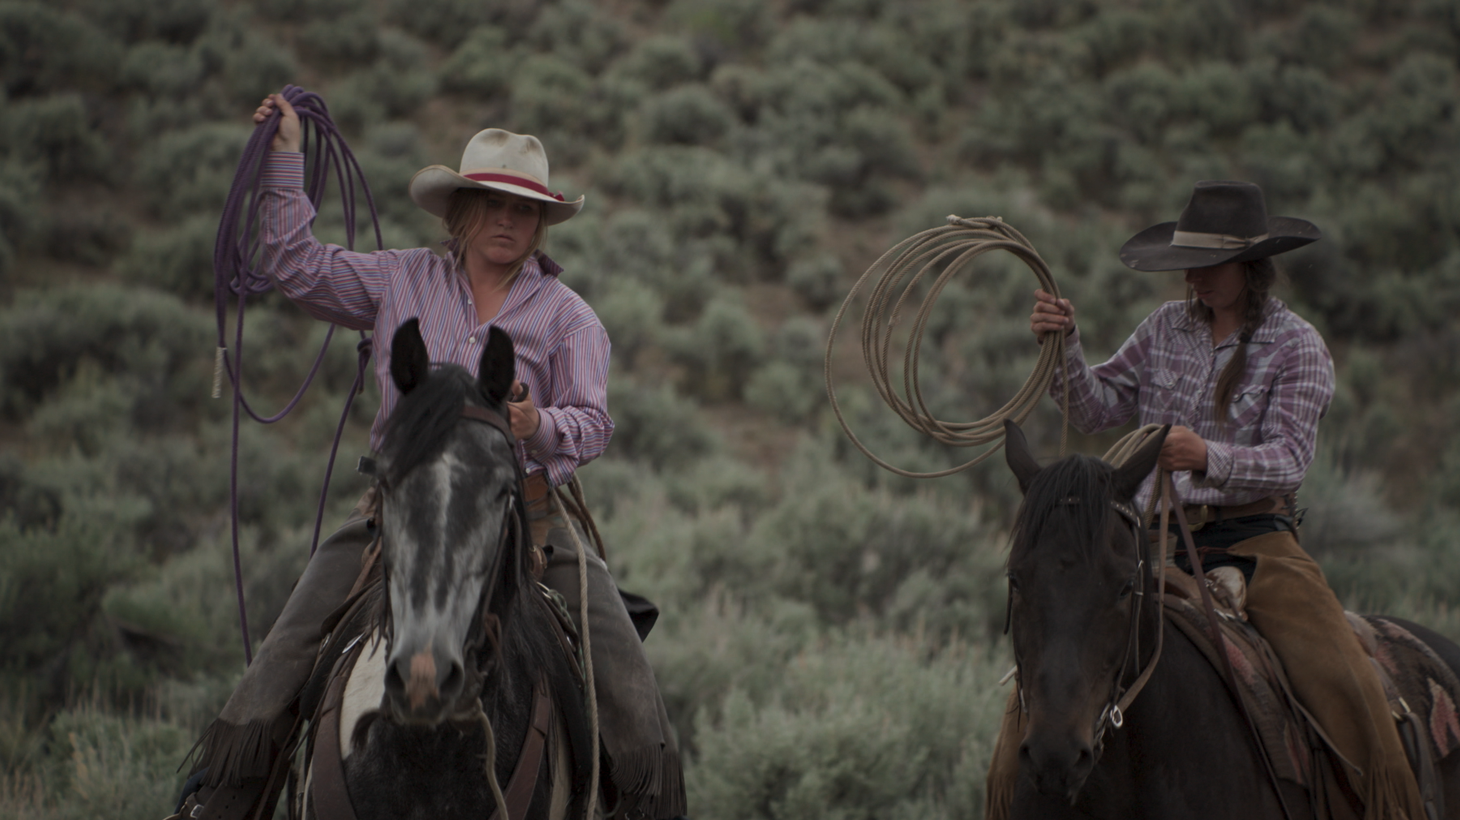 “Bitterbrush” follows two female cattle herders, Colie Moline and Hollyn Patterson, in rural Idaho. Credit: Alejandro Mejia, AMC.